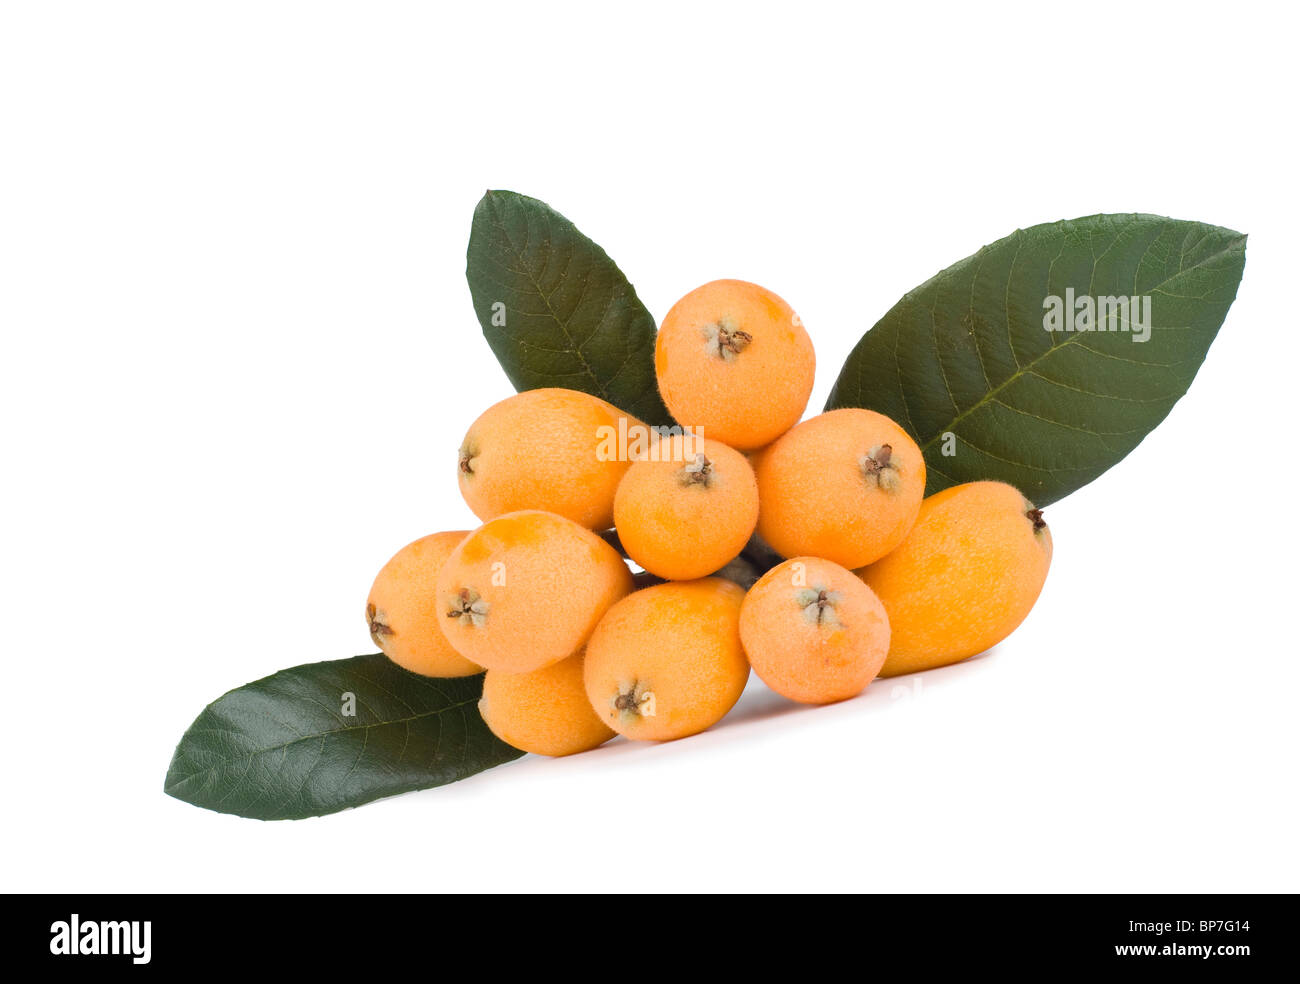 Fresh loquat fruit with green leaves. Isolated on white background. Stock Photo